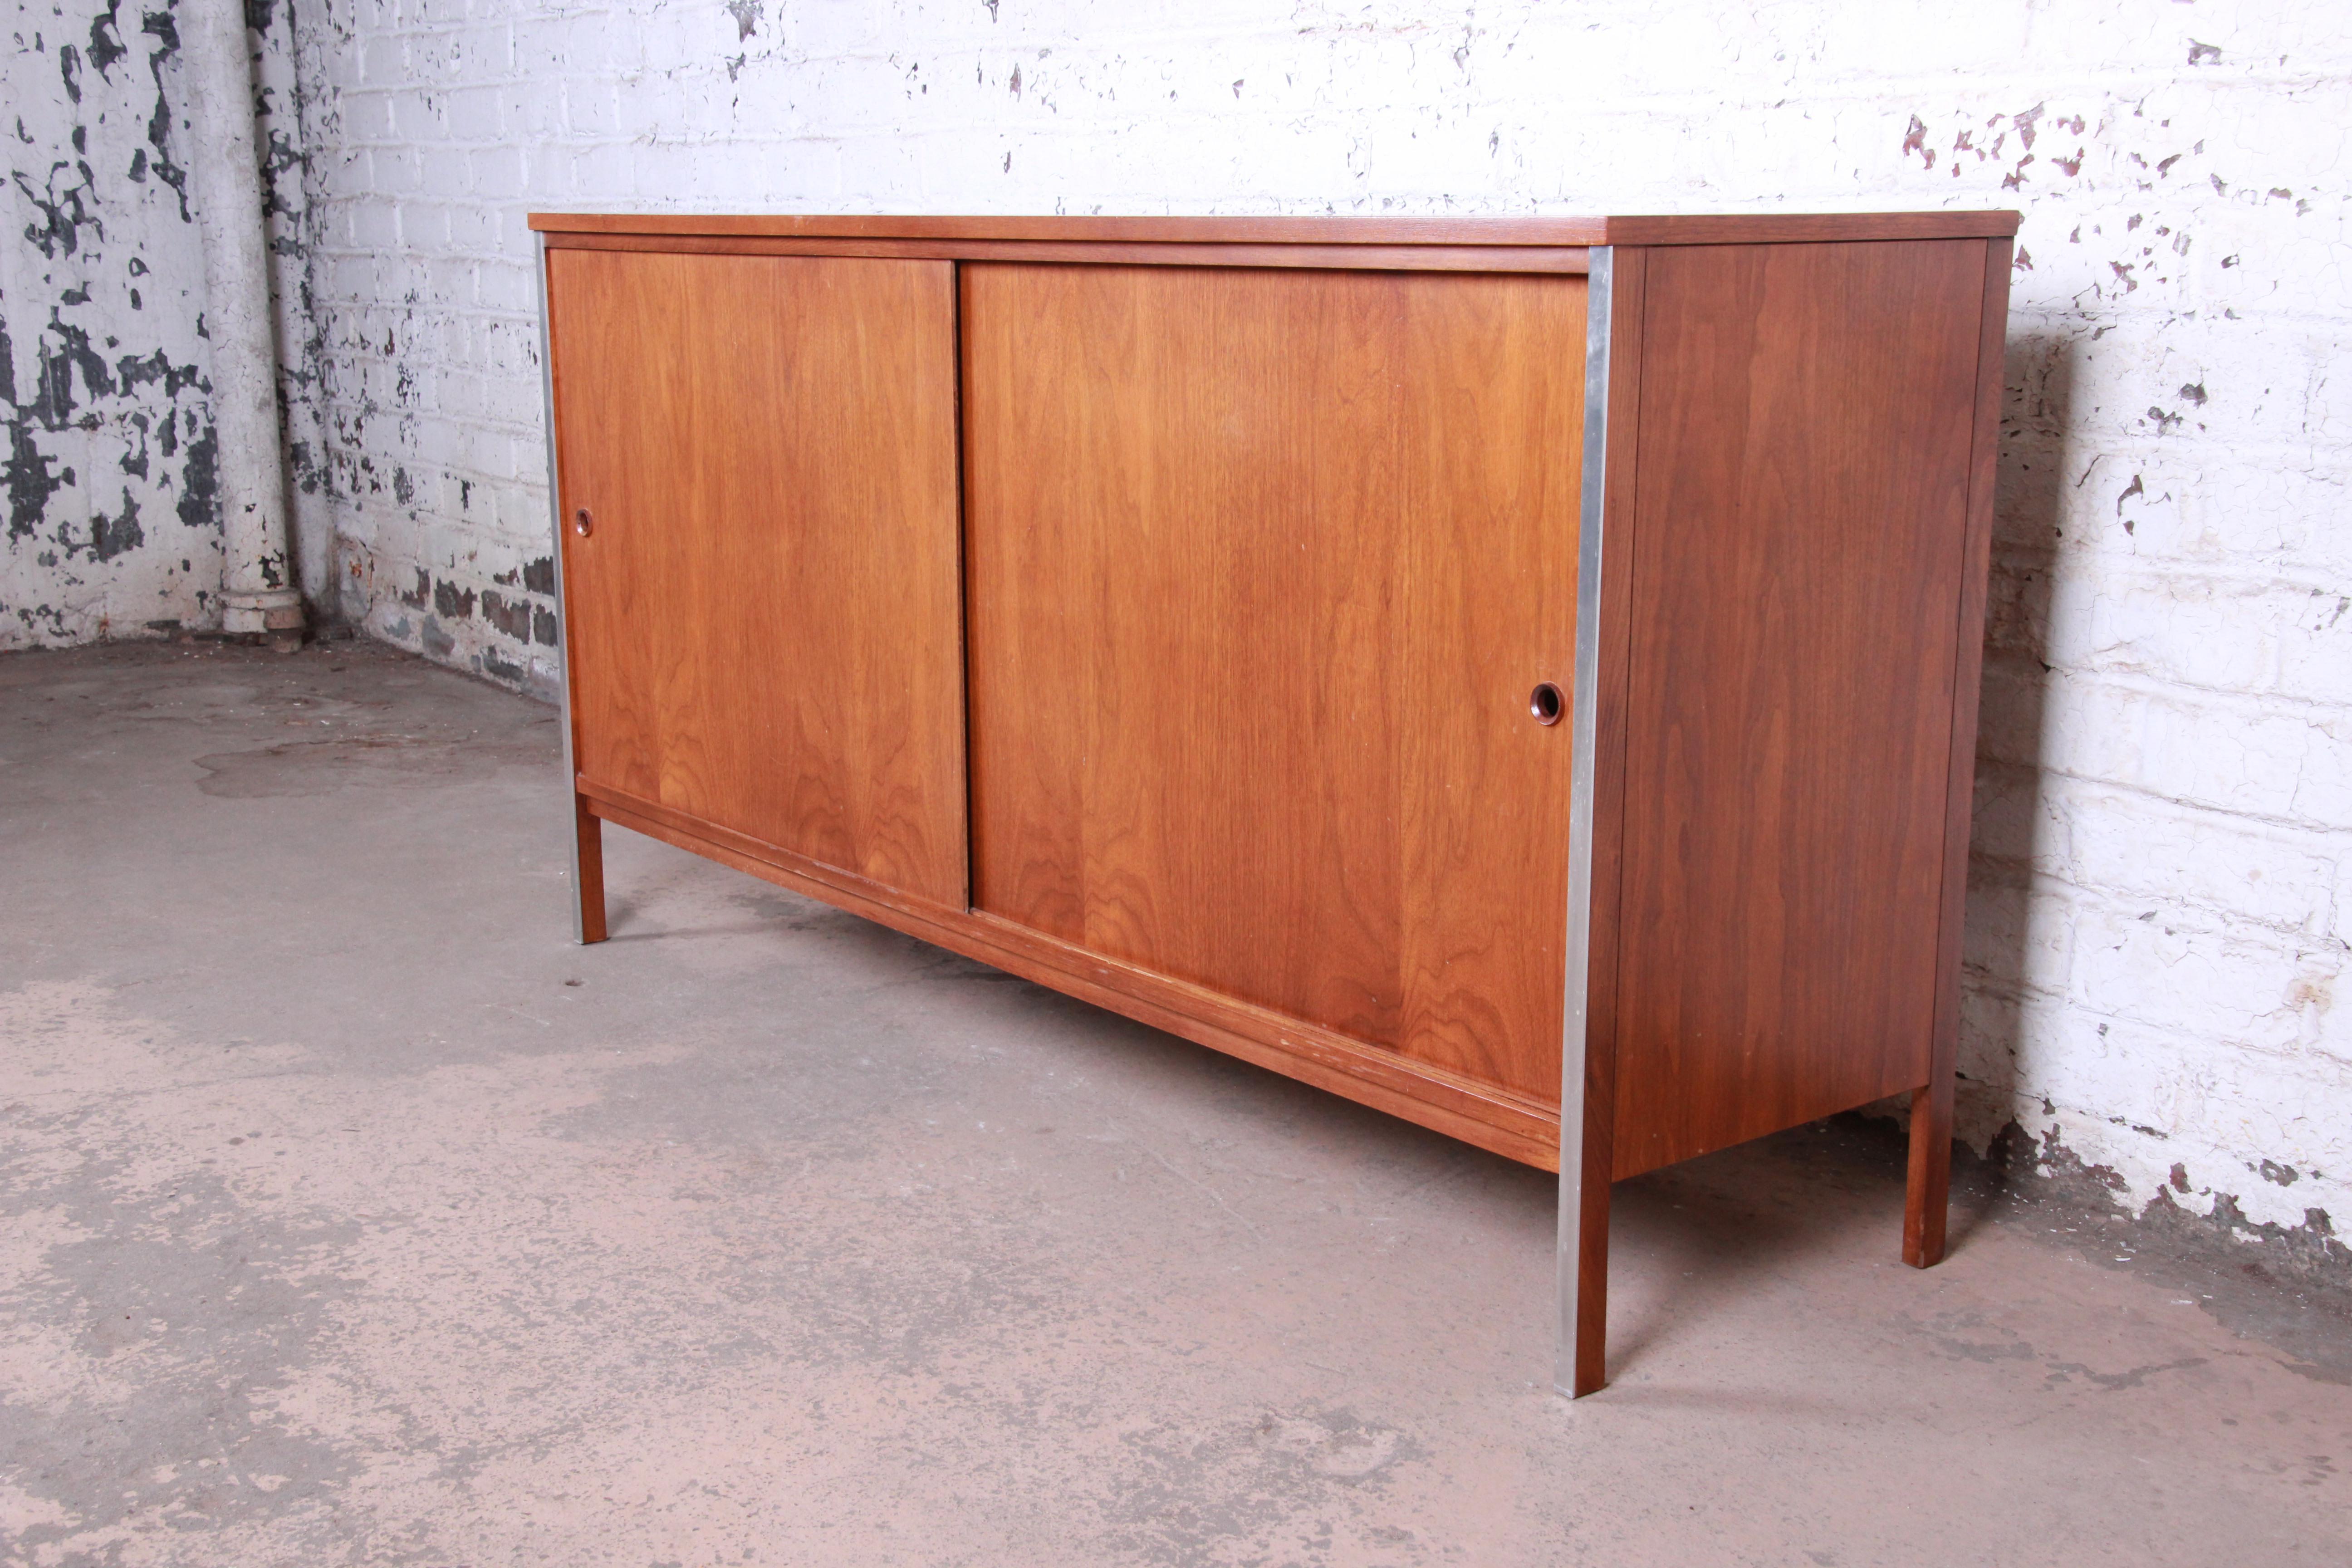 An exceptional Mid-Century Modern walnut sideboard or credenza designed by Paul McCobb for his Linear Group line for Calvin Furniture. The credenza features gorgeous walnut wood grain with aluminum trim. It offers good storage, with two dovetailed